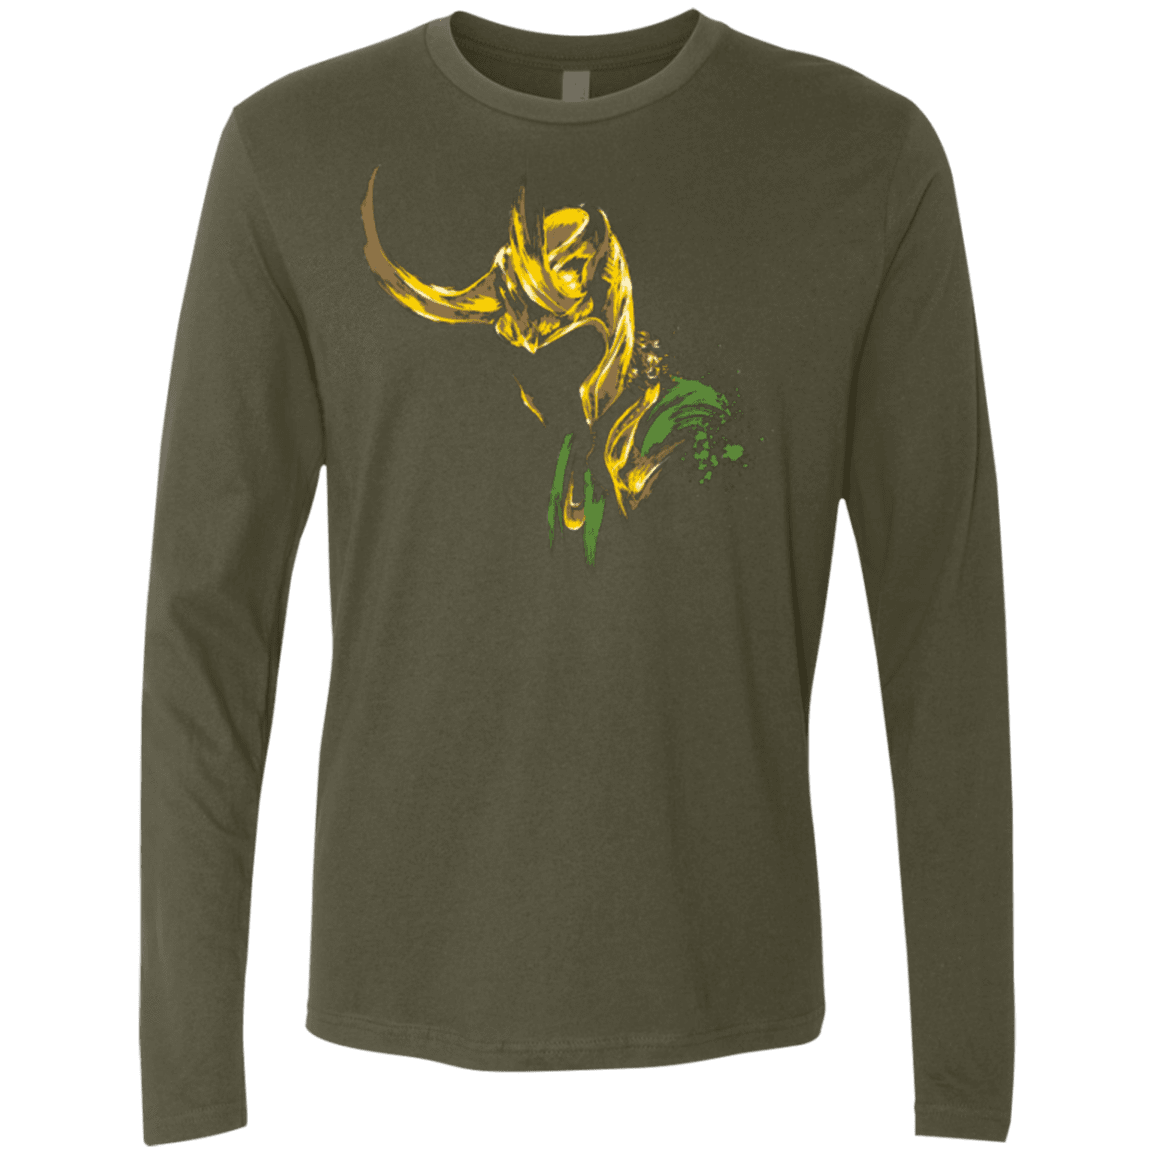 T-Shirts Military Green / Small PRINCE OF MISCHIEF Men's Premium Long Sleeve